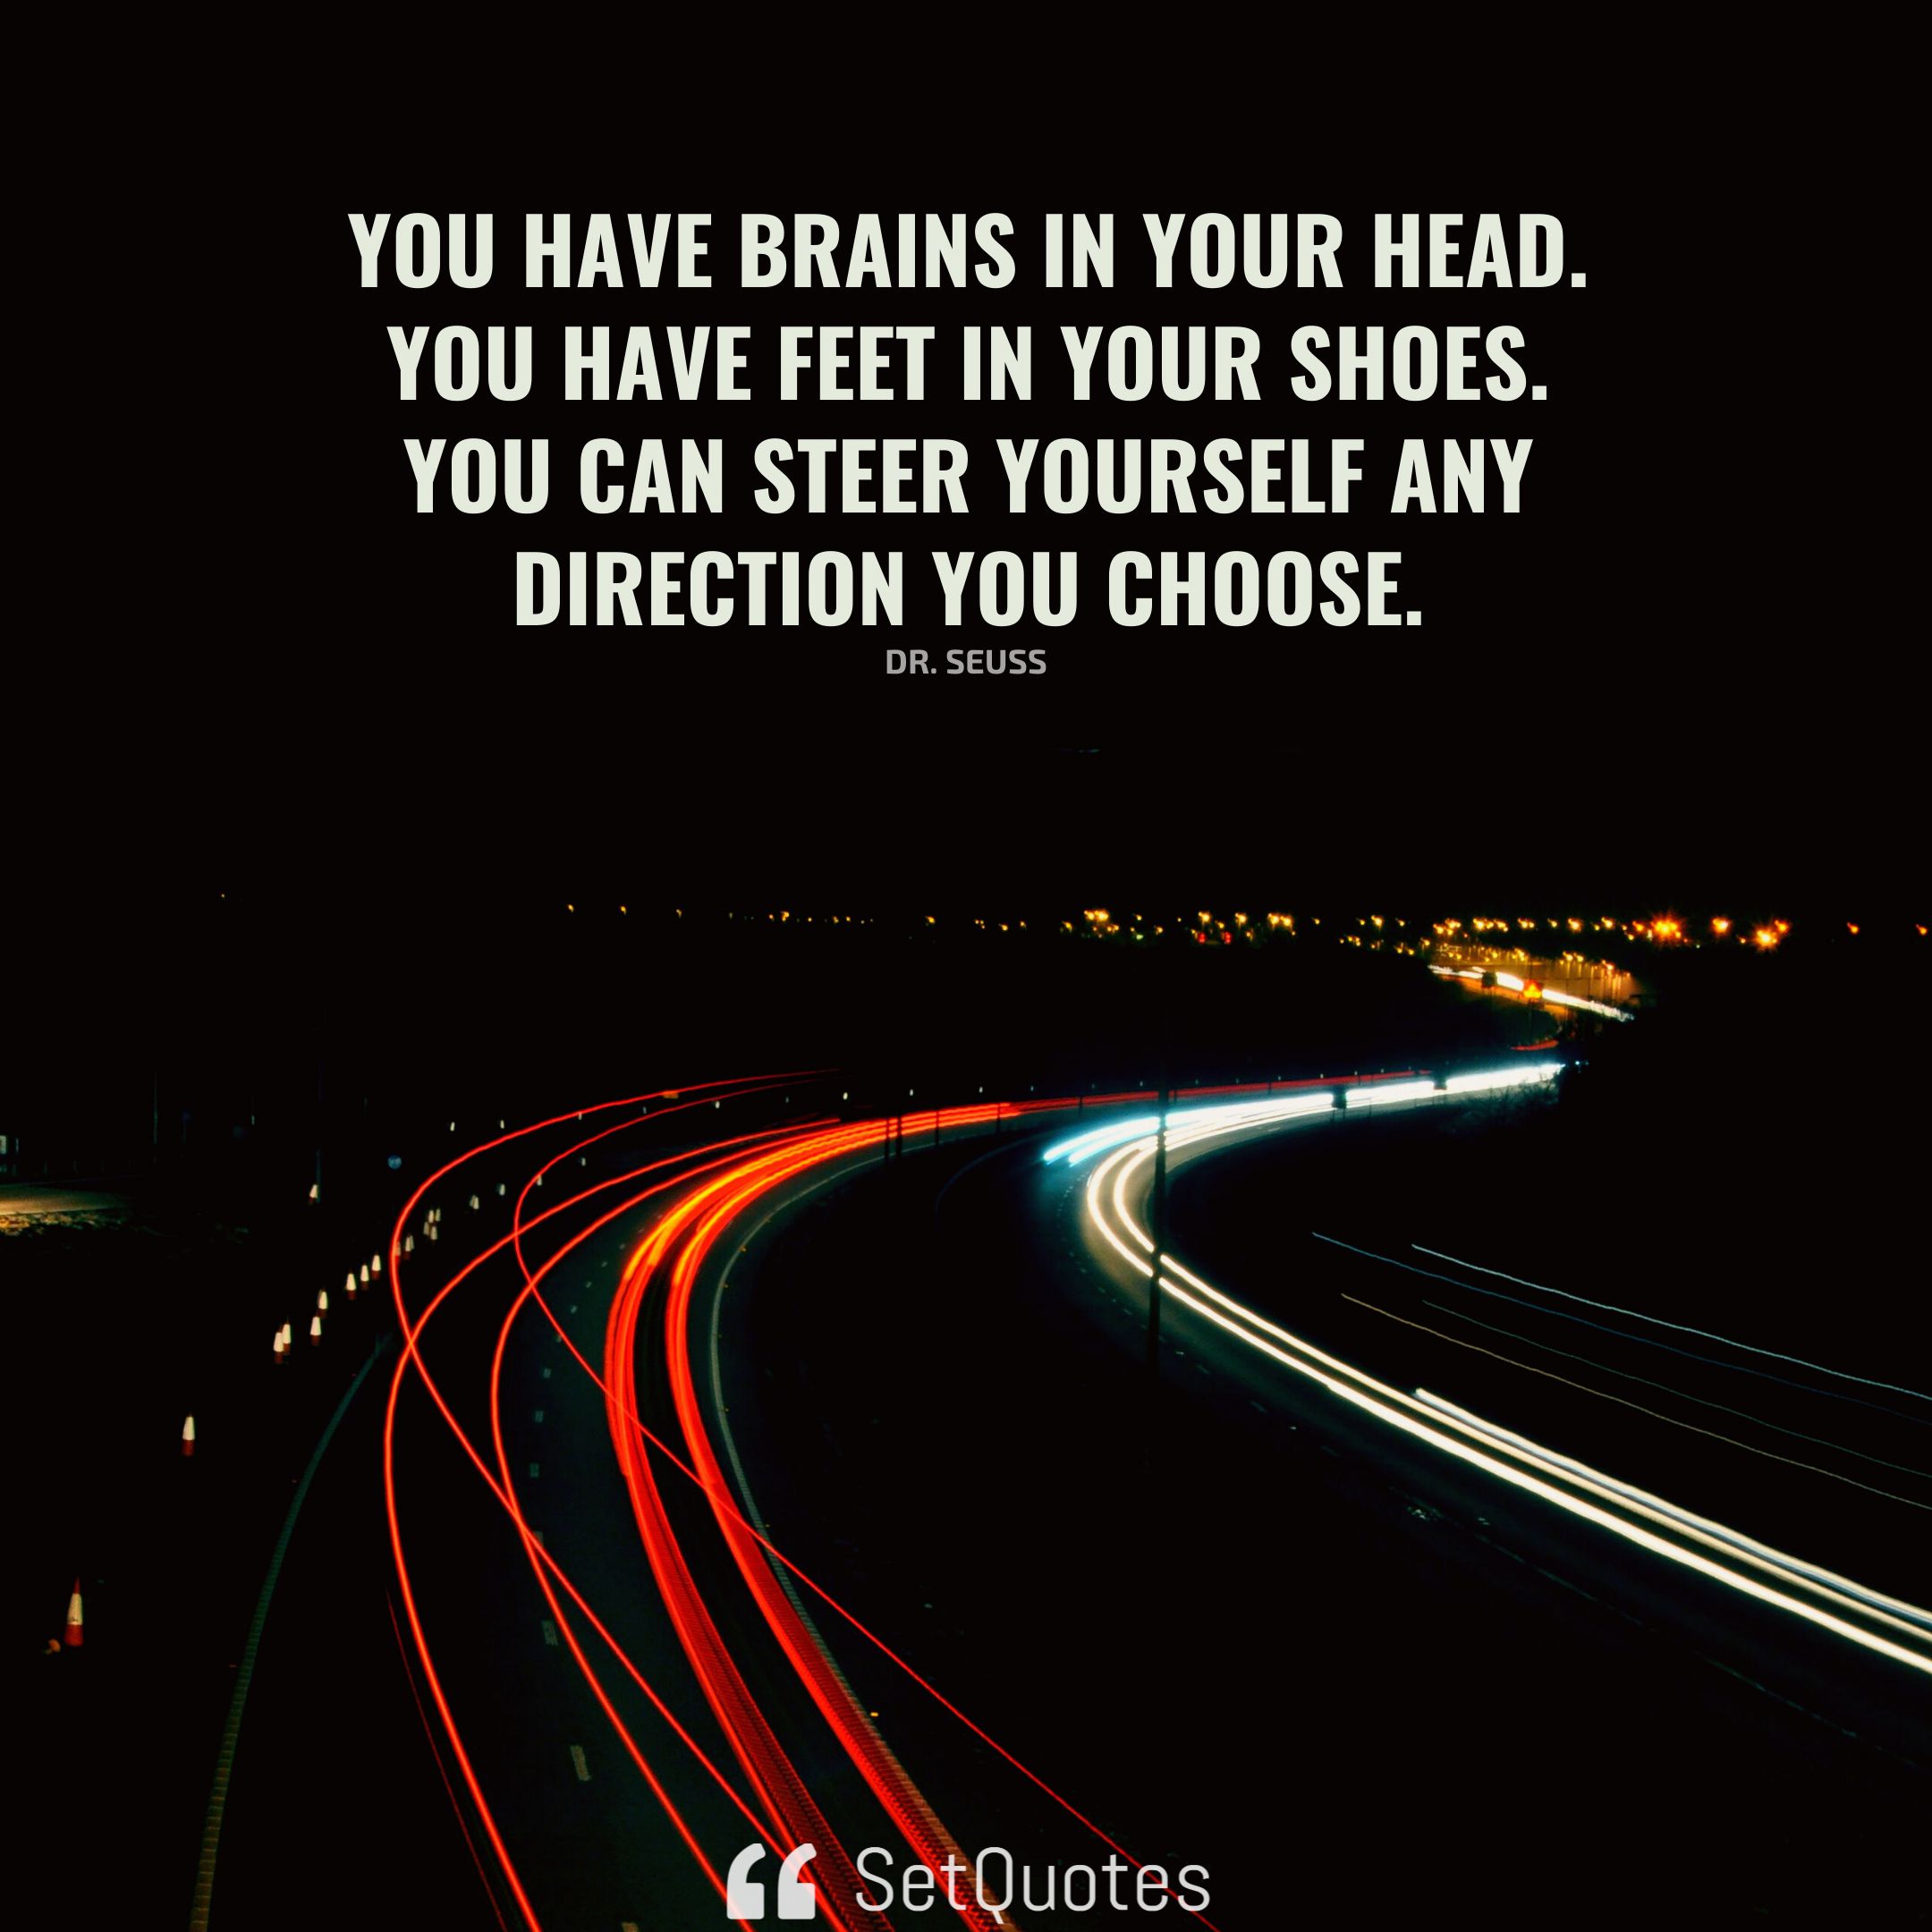 Running Quotes from Running Shoe Companies  Run For Good